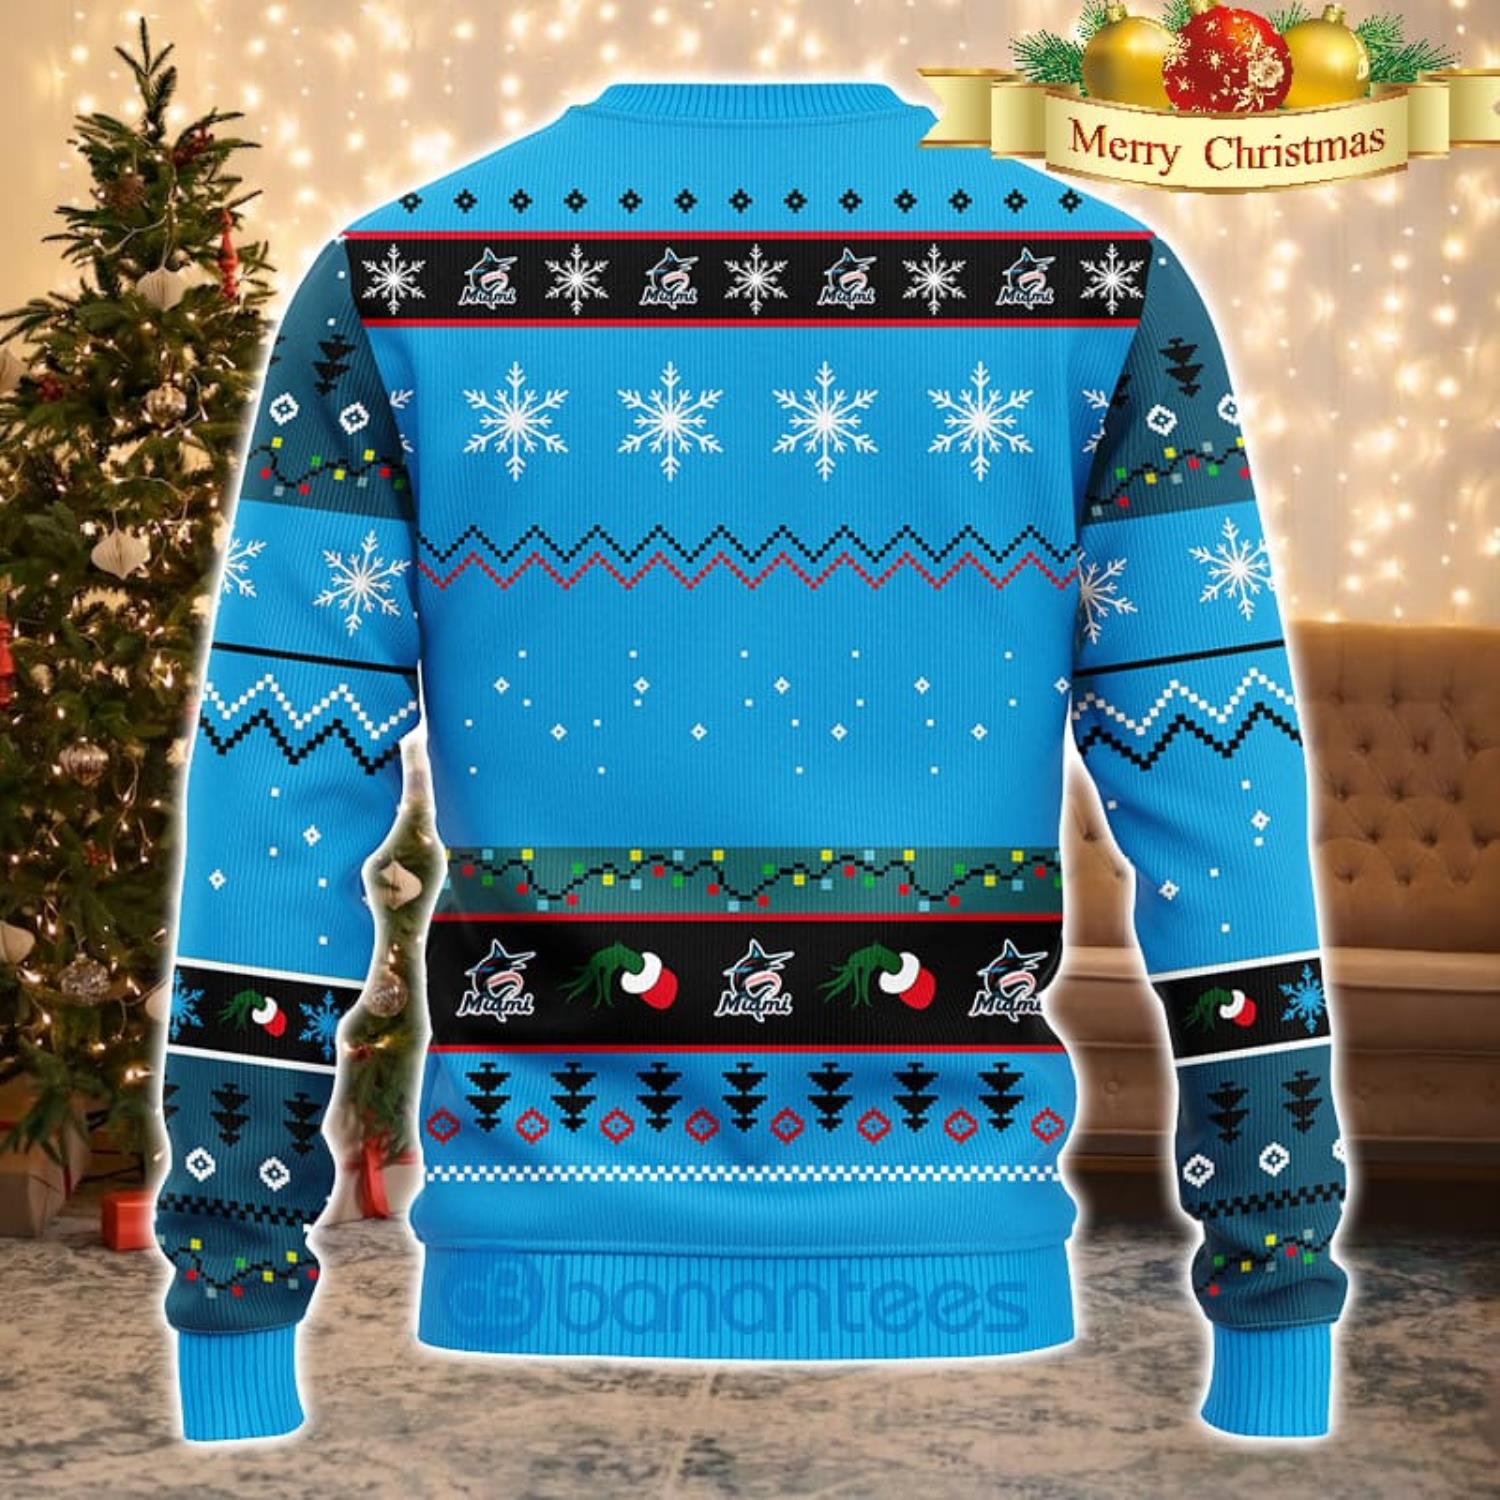 MLB Miami Marlins Print Funny Grinch Ugly Christmas Sweater - The